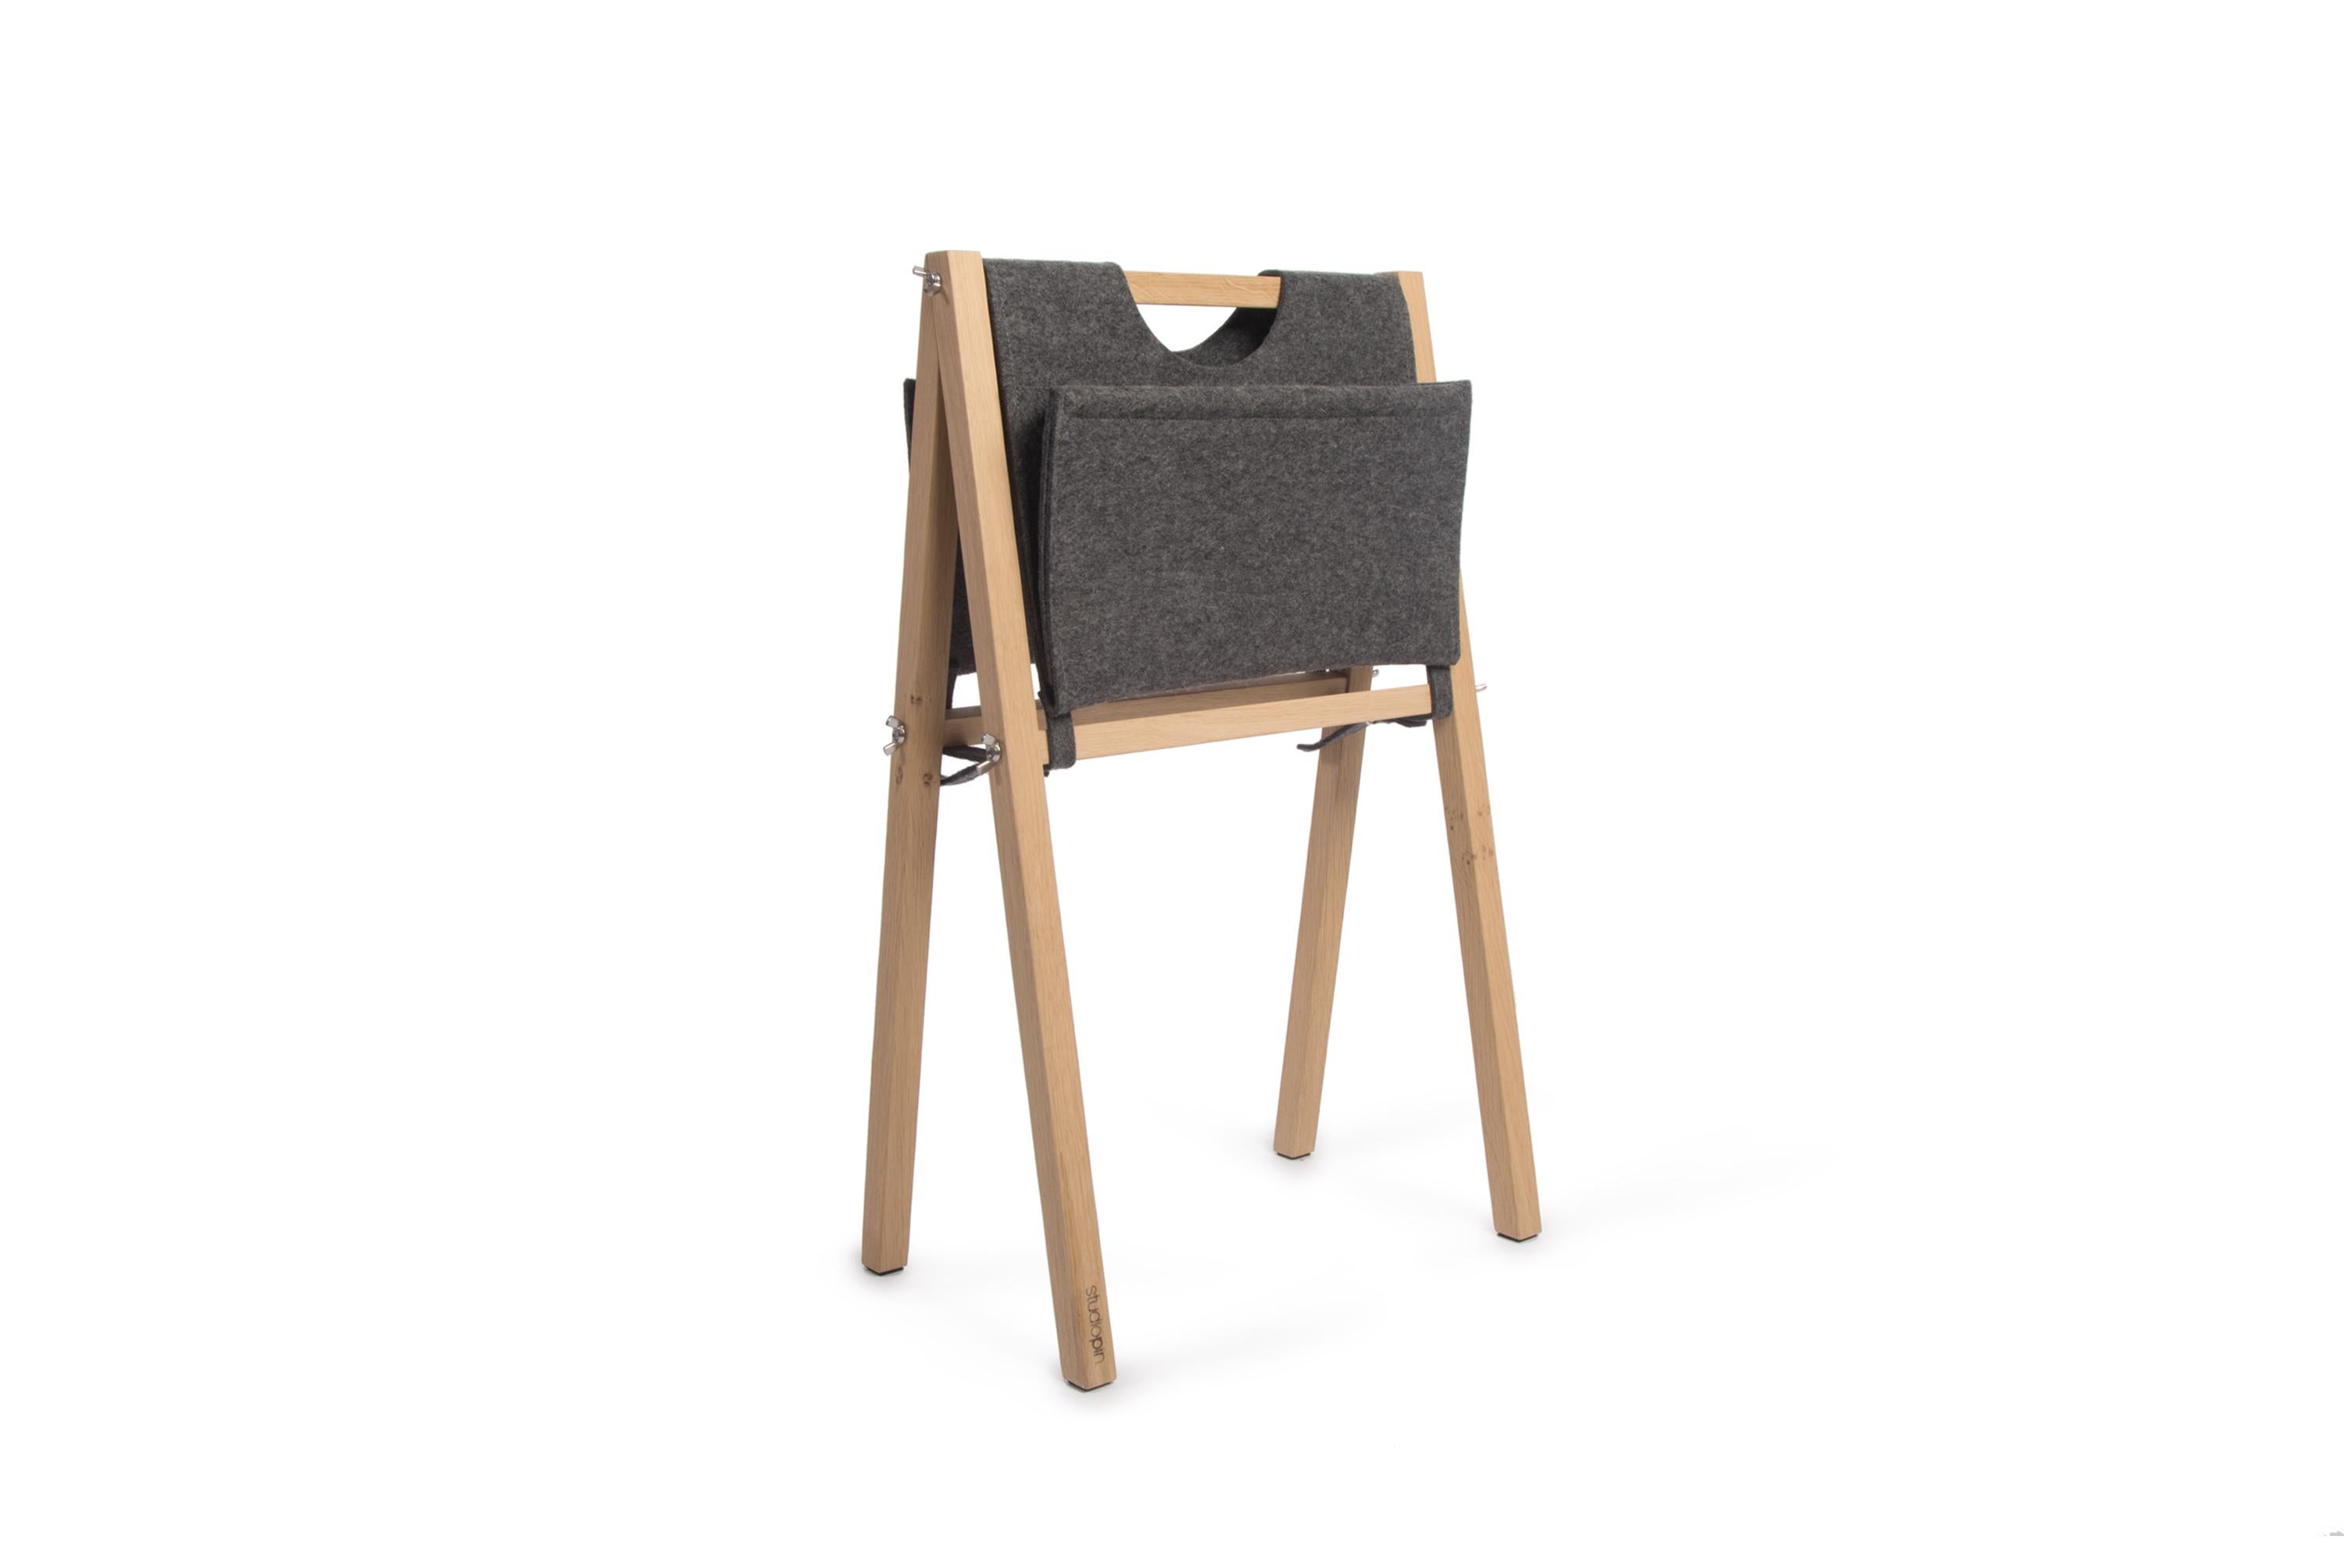 Dark gray stan magazine rack by Studio Pin
Dimensions: W 42 x D 26 x H 67.2 cm
Materials: oak, wool felt.
Weight: 2.15 Kg

Stan is a magazine rack. The oak frame perfectly matches the 3 types of bags in the colors light brown and dark grey of